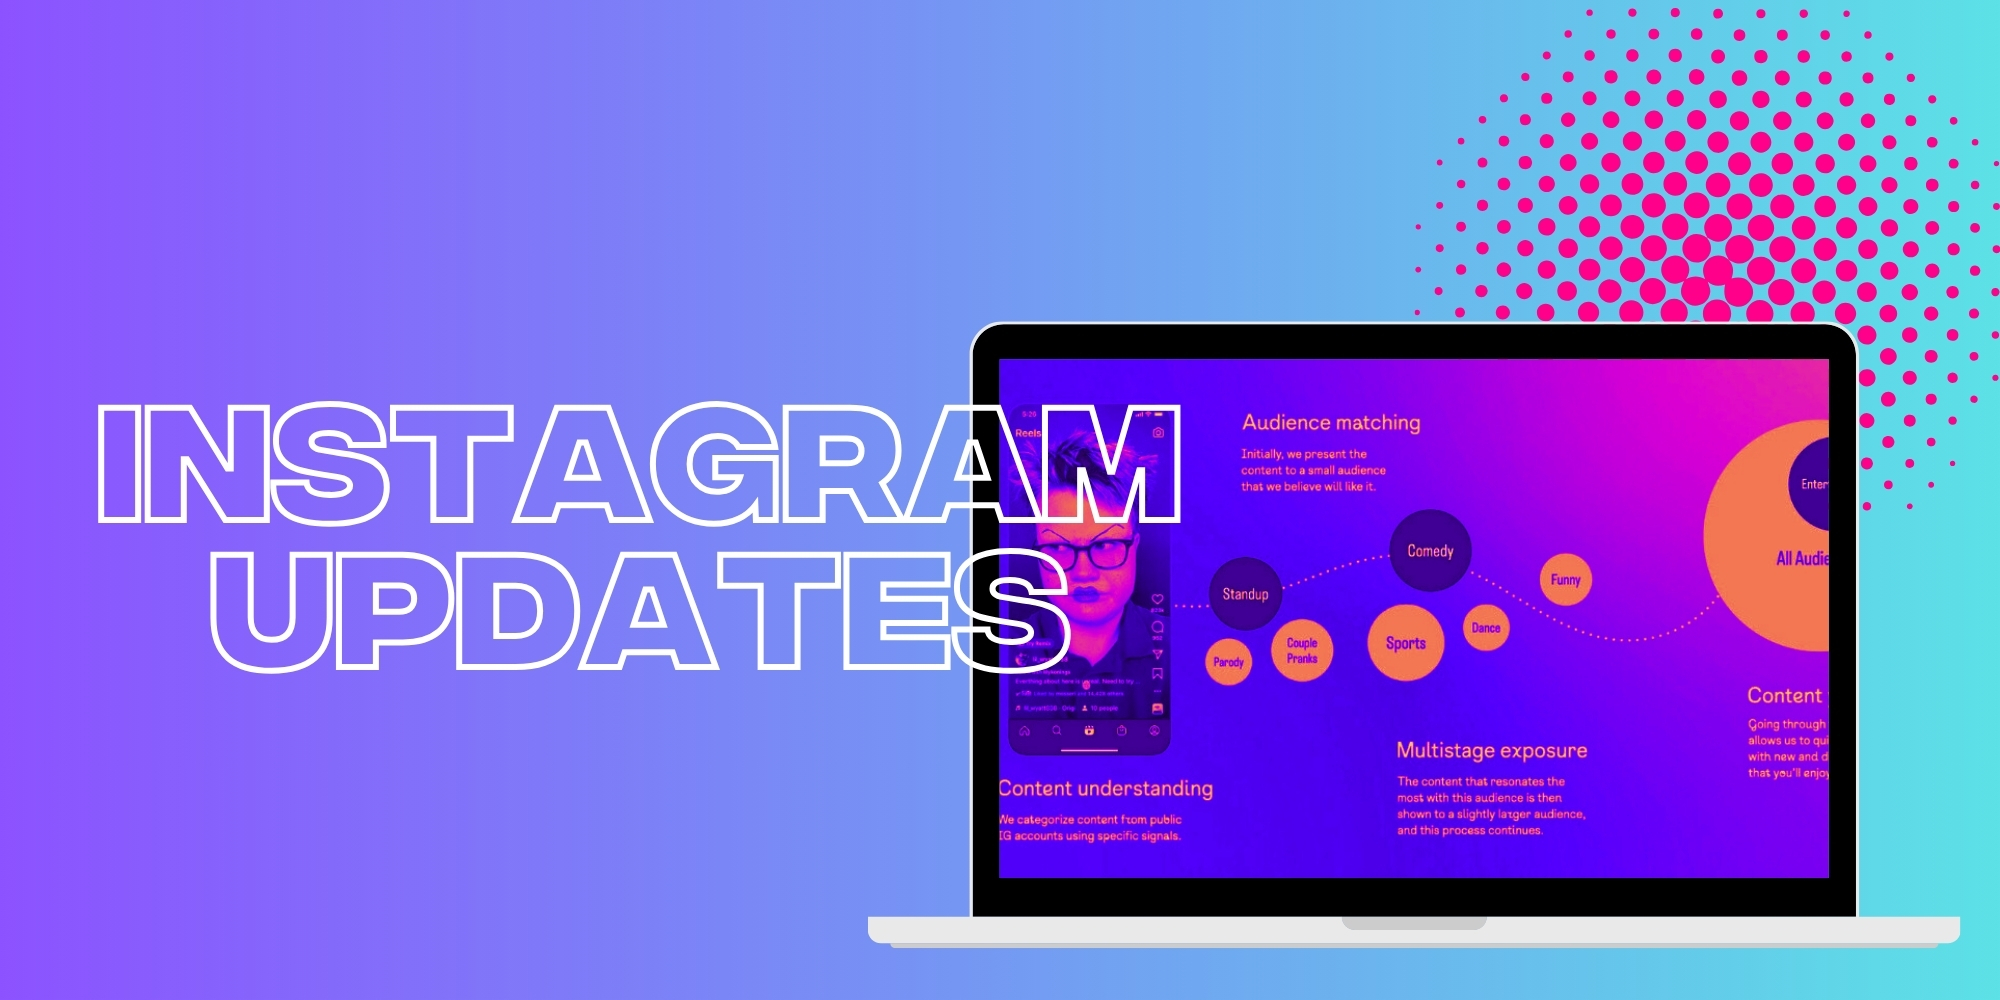 Stripping it back: Instagram’s updated algorithm seeks to revalue the creator-fan relationship